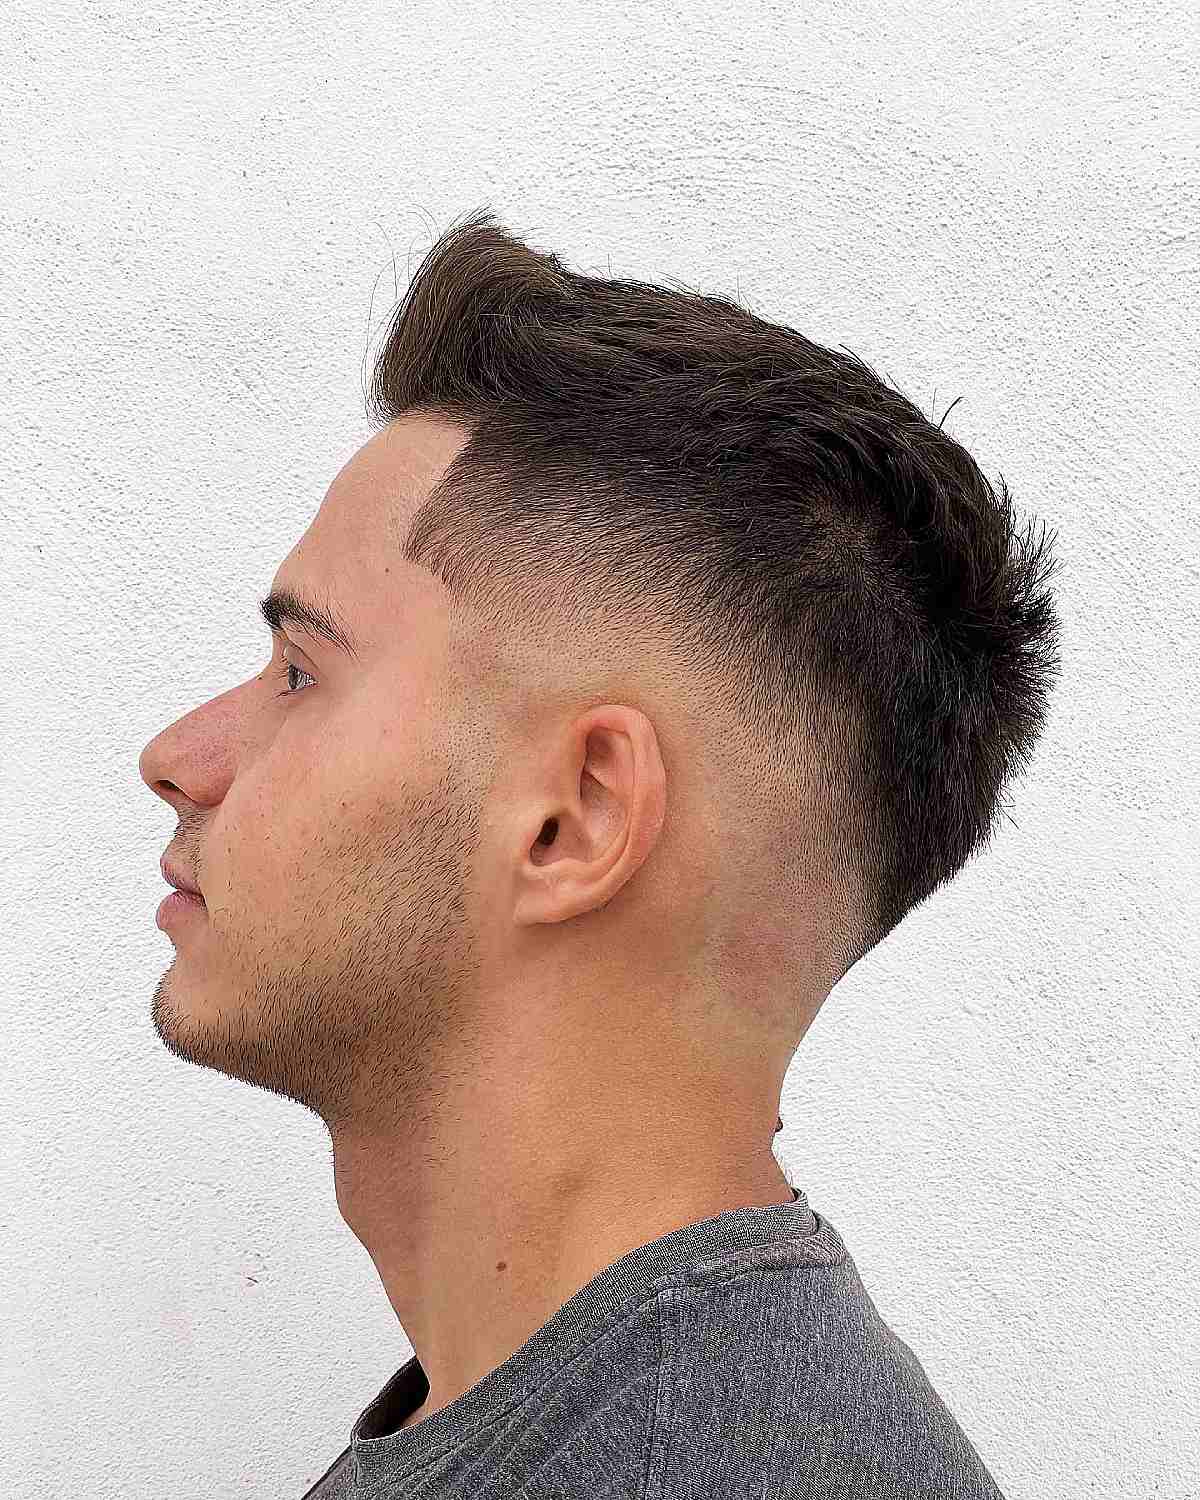 Short Faded Quiff with Line Up and Textured Crew Cut